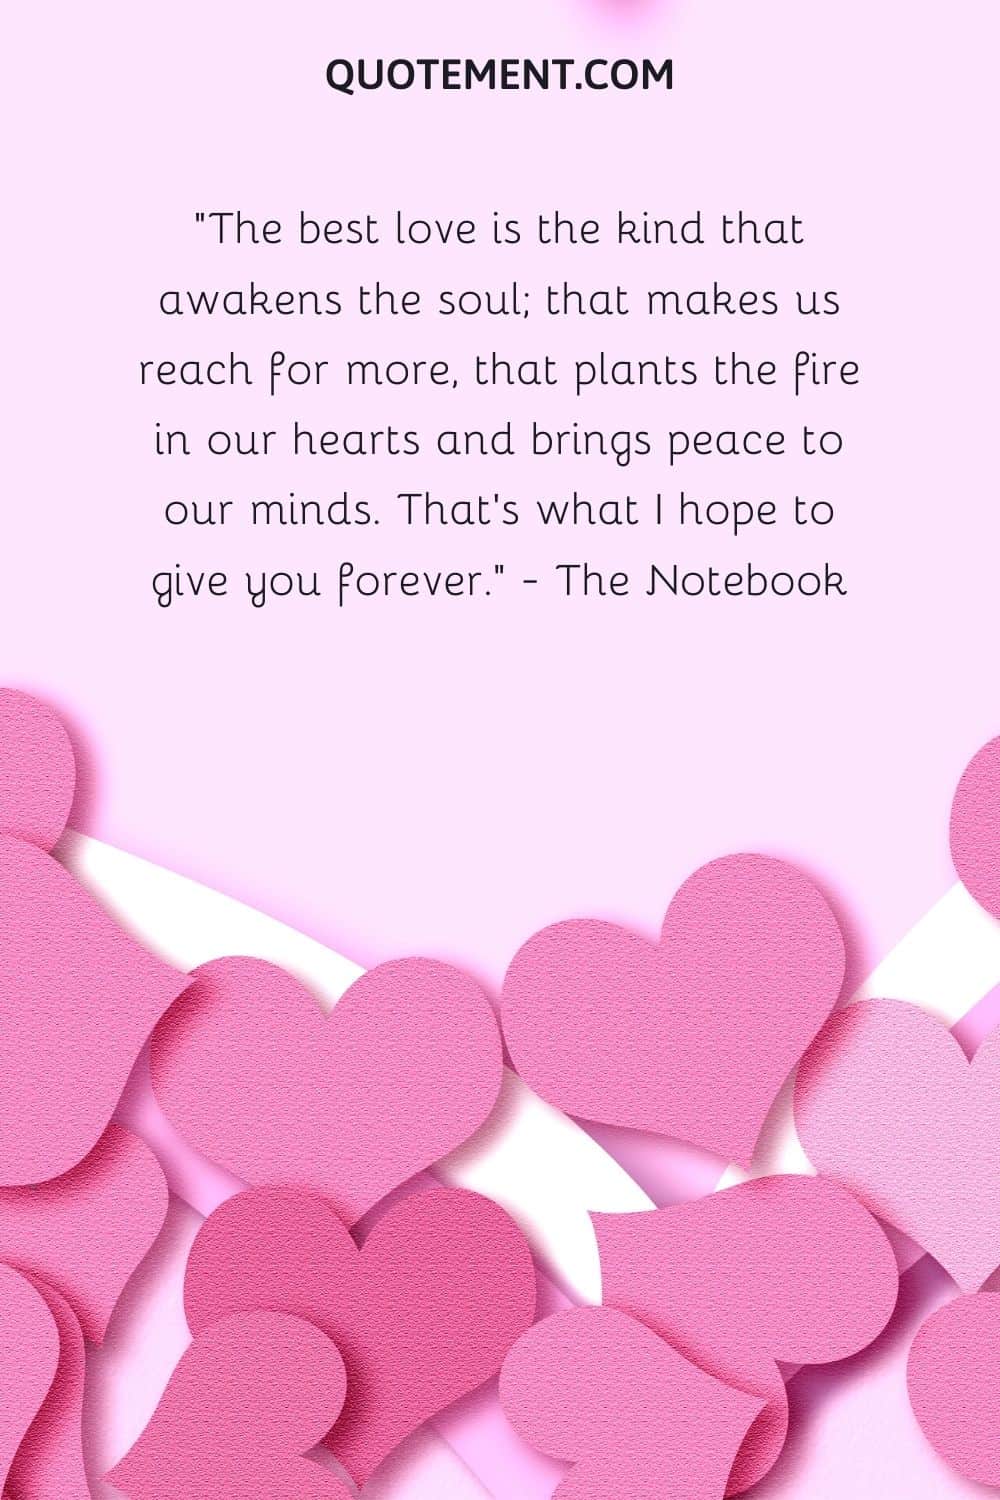 The Best Love Is The Kind That Awakens The Soul That Makes Us Reach For More That Plants The Fire In Our Hearts And Brings Peace To Our Minds. Thats What I Hope To Give You Forever. — The Notebook 